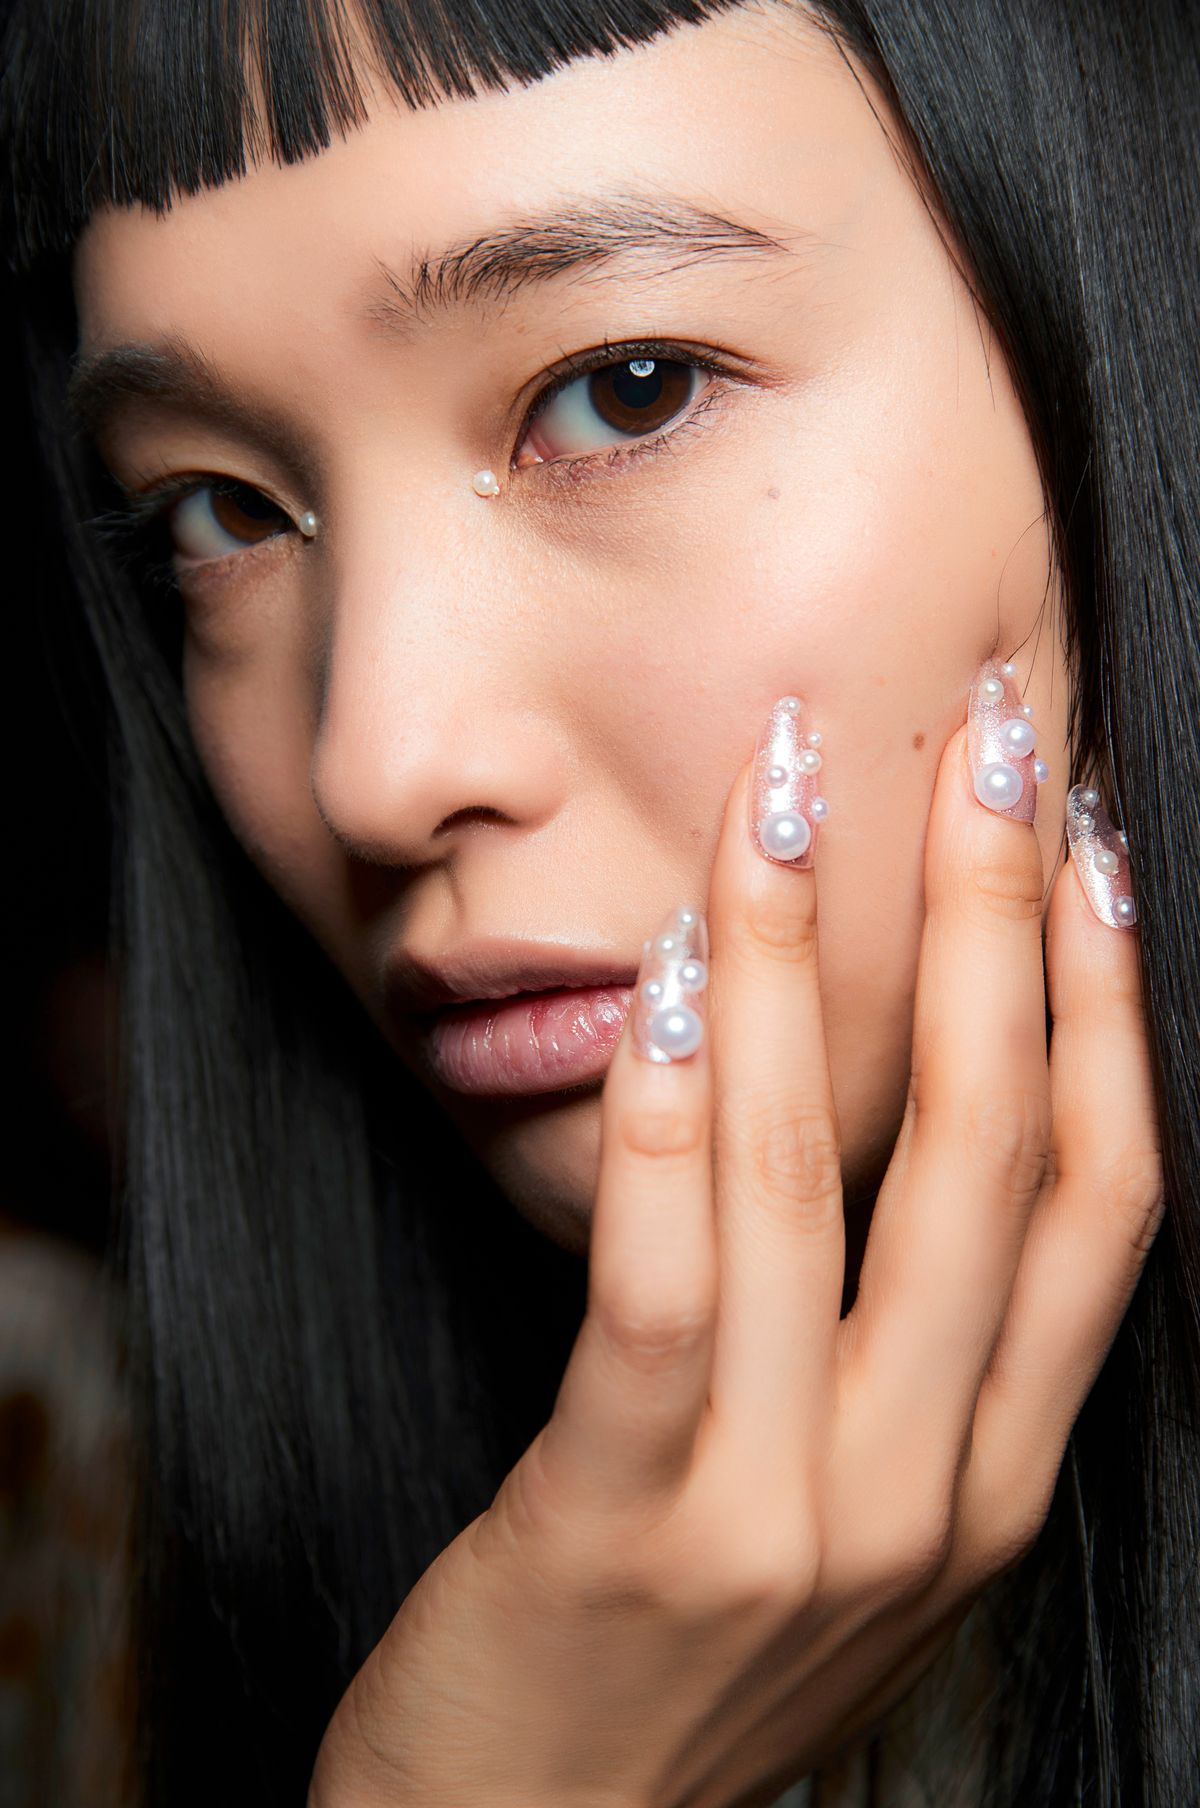 A Guide To Gel Nail Extensions — What Are Gel Nail Extensions?